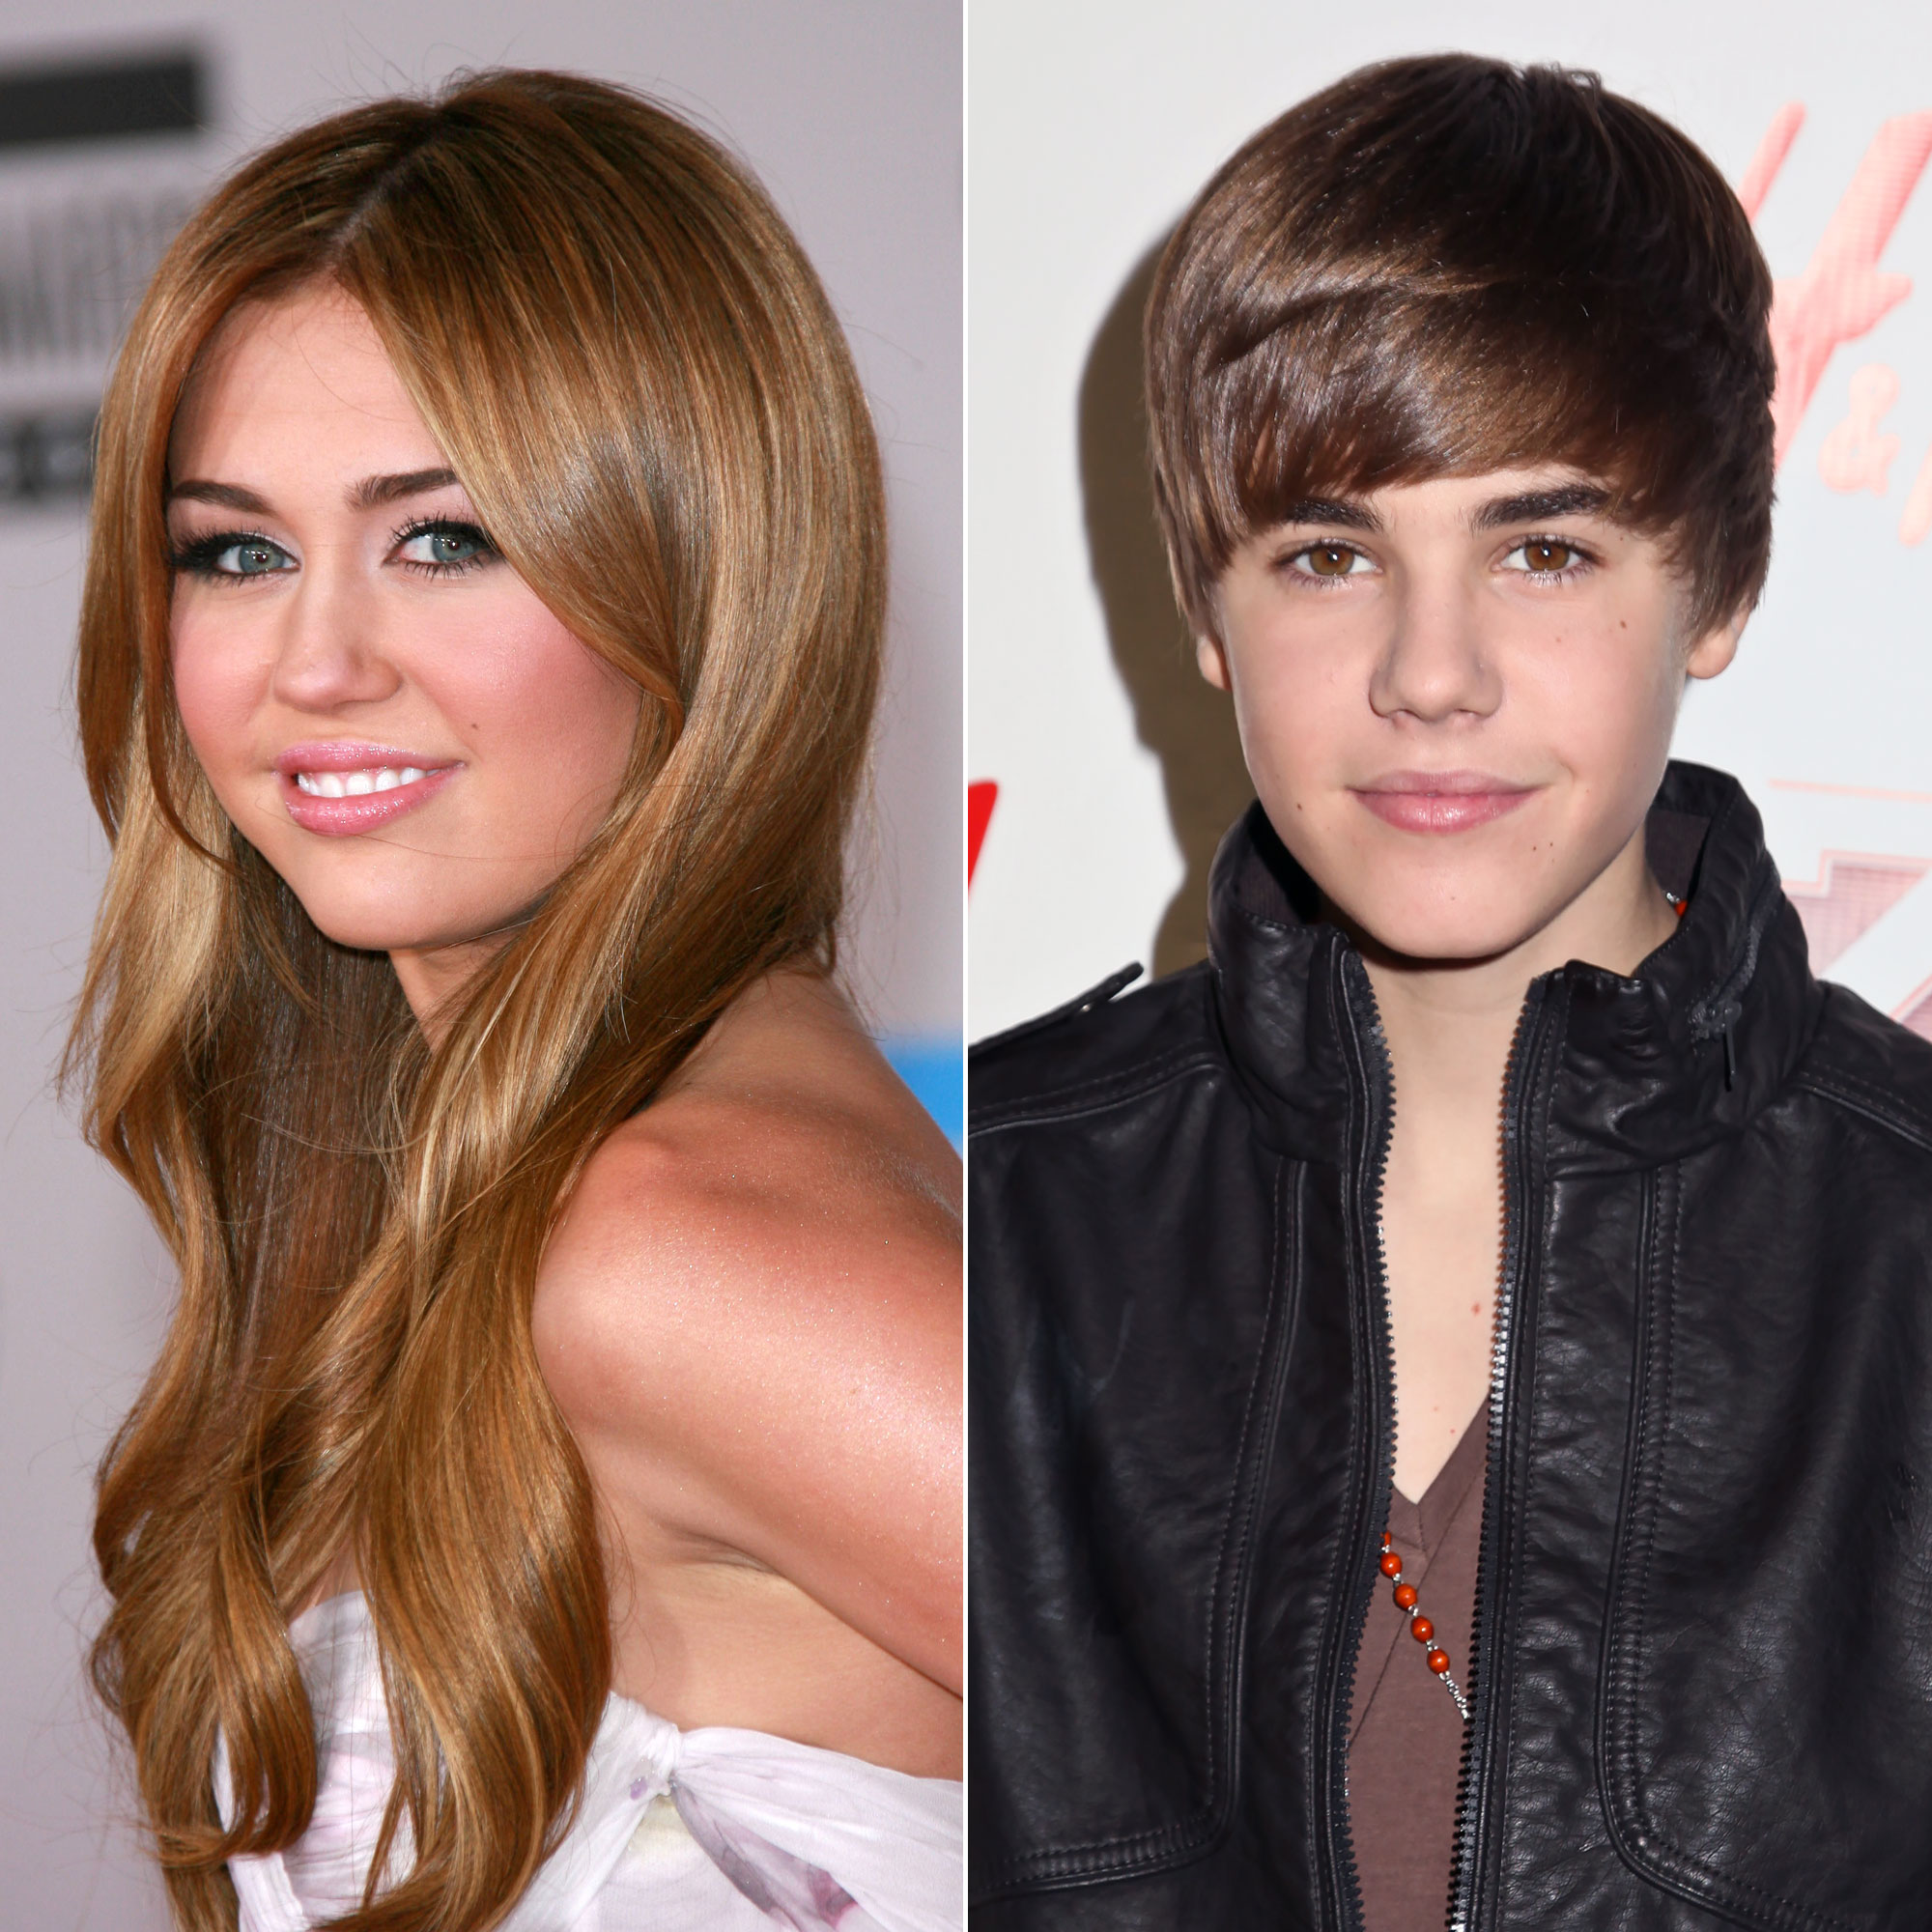 Miley Cyrus Dating History Timeline Of Her Famous Exes Flings.